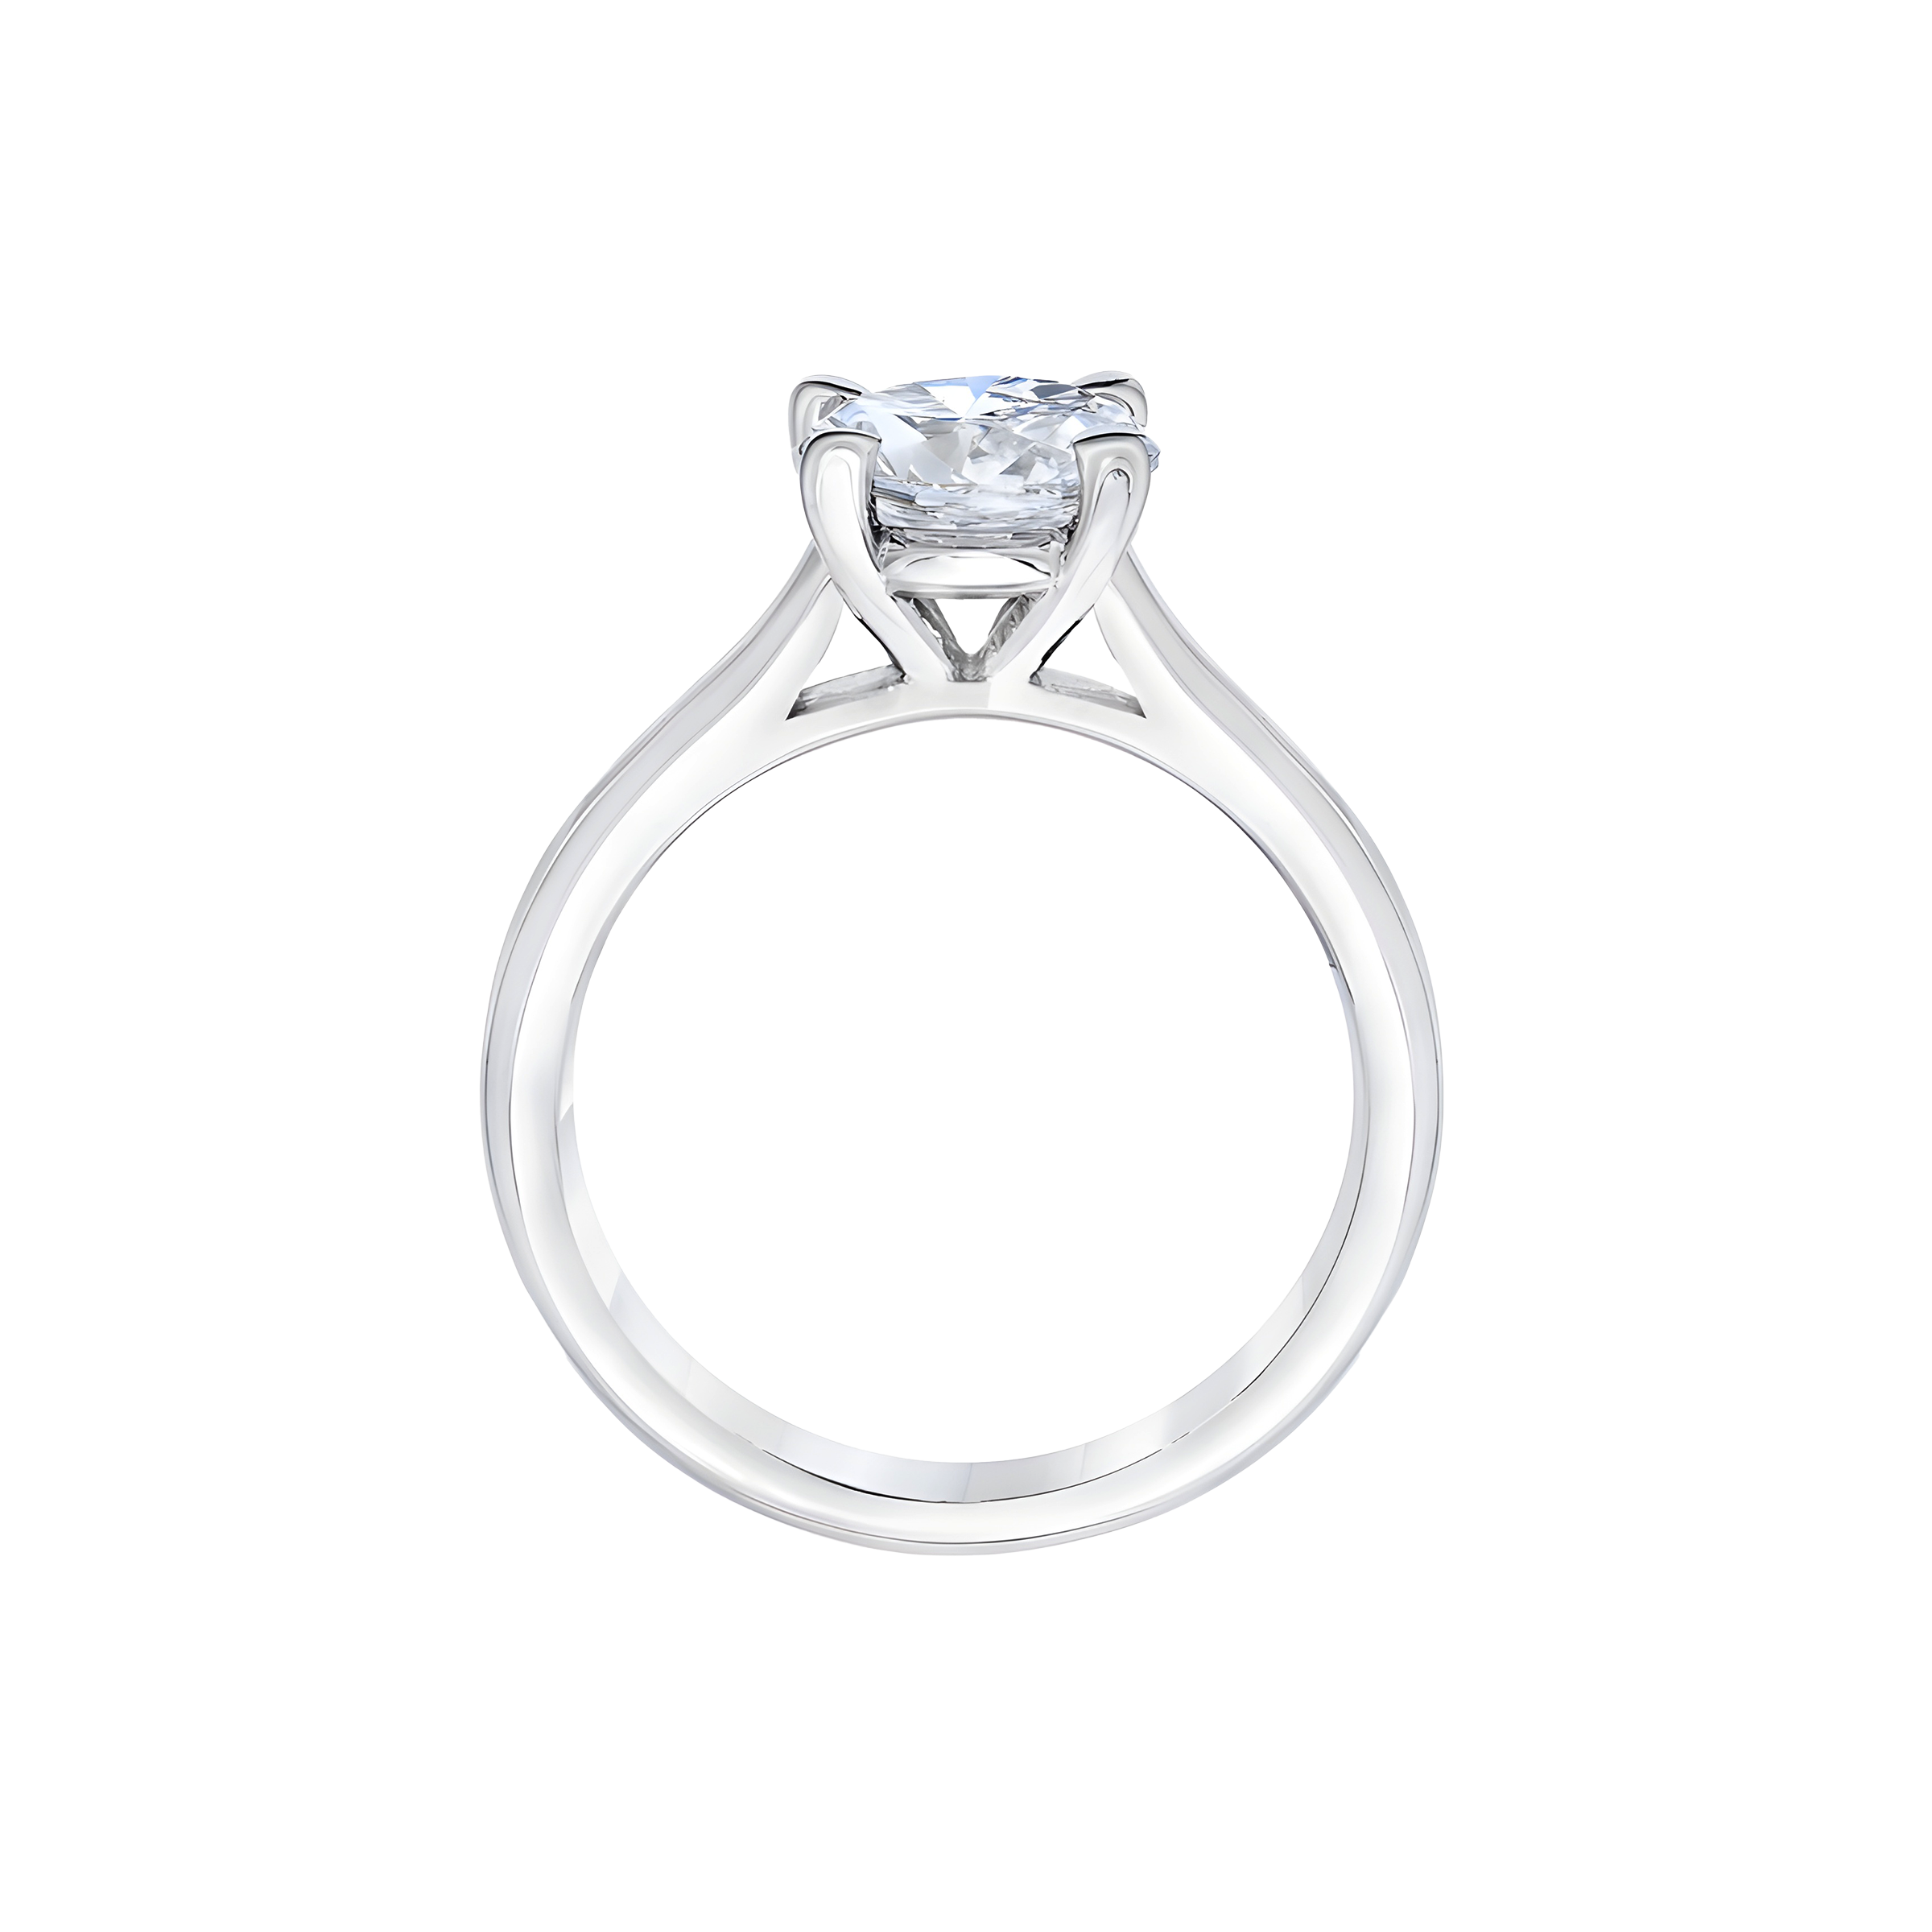 Round Brilliant Solitaire Diamond Engagement Ring in 18k White Gold